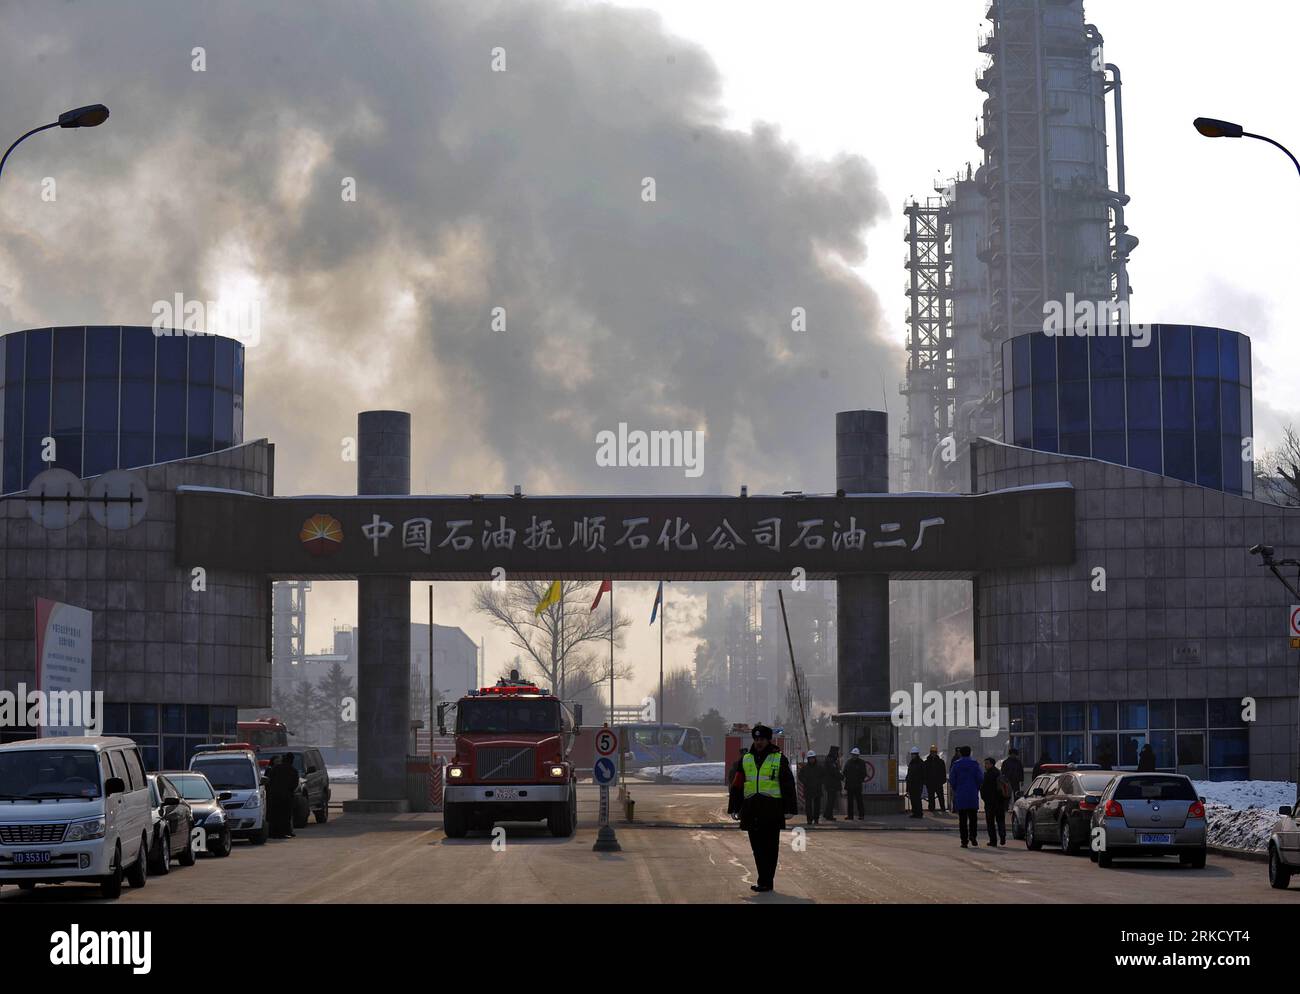 Bildnummer: 54830024  Datum: 19.01.2011  Copyright: imago/Xinhua FUSHUN, Jan. 19, 2011 (Xinhua) -- Smoke rises from the site where an explosion occurred at a refinery of Fushun Petrochemical Company in Fushun, northeast China s Liaoning Province, Jan. 19, 2011. Firefighters have brought the fire under control, eliminating the possibility of secondary explosions. No casualties have been reported so far. (Xinhua/Yao Jianfeng) (hdt) CHINA-FUSHUN-OIL REFINERY-EXPLOSION (CN) PUBLICATIONxNOTxINxCHN Wirtschaft Fabrik petrochemische Industrie Chemiefabrik Raffinerie Öl Ölraffinerie Explosion Unglück k Stock Photo